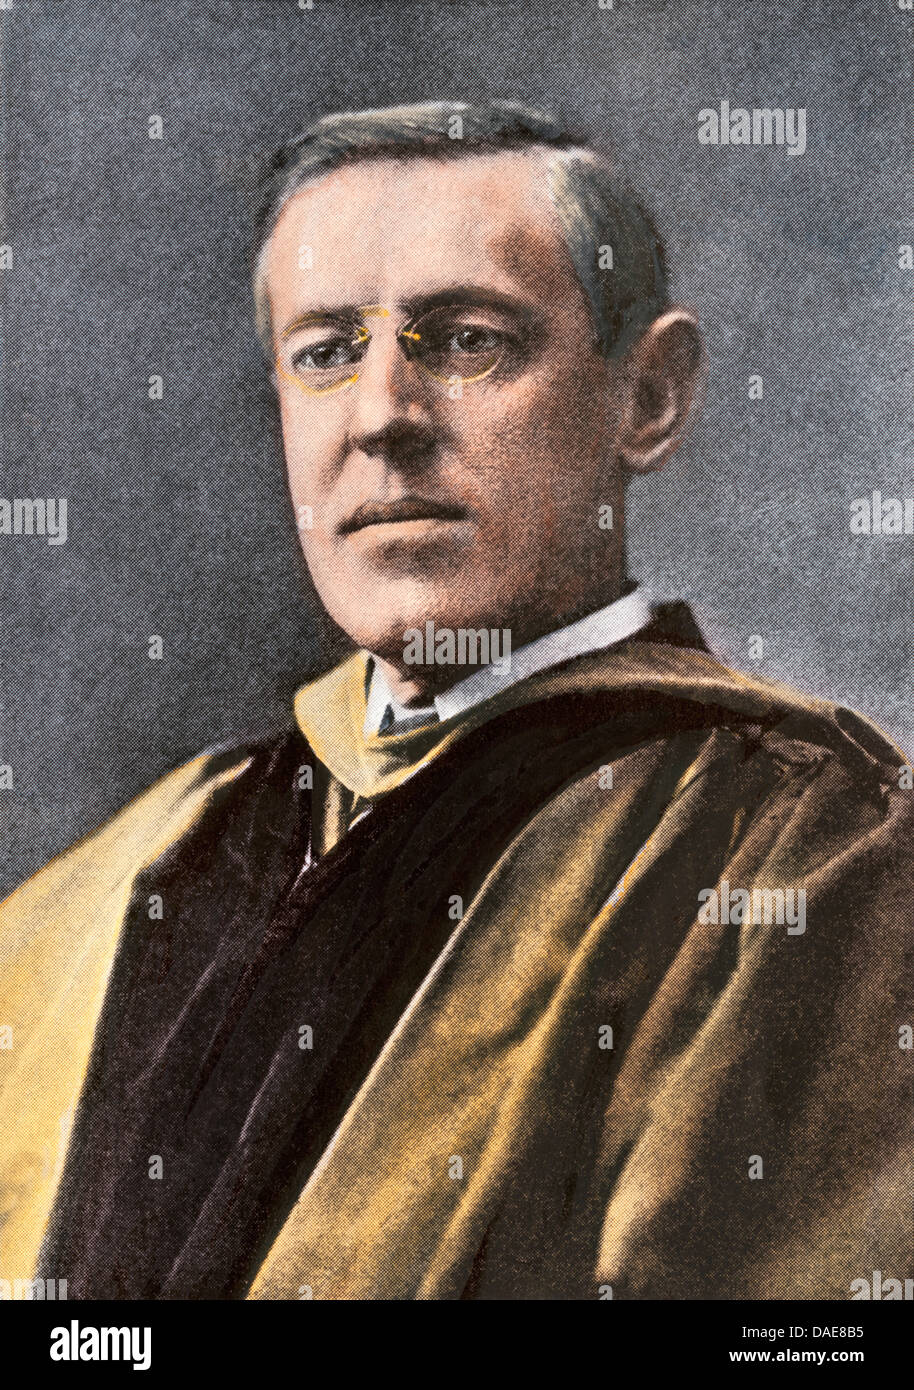 Woodrow Wilson, LL.D., as president of Princeton University. Hand-colored halftone of a photograph Stock Photo